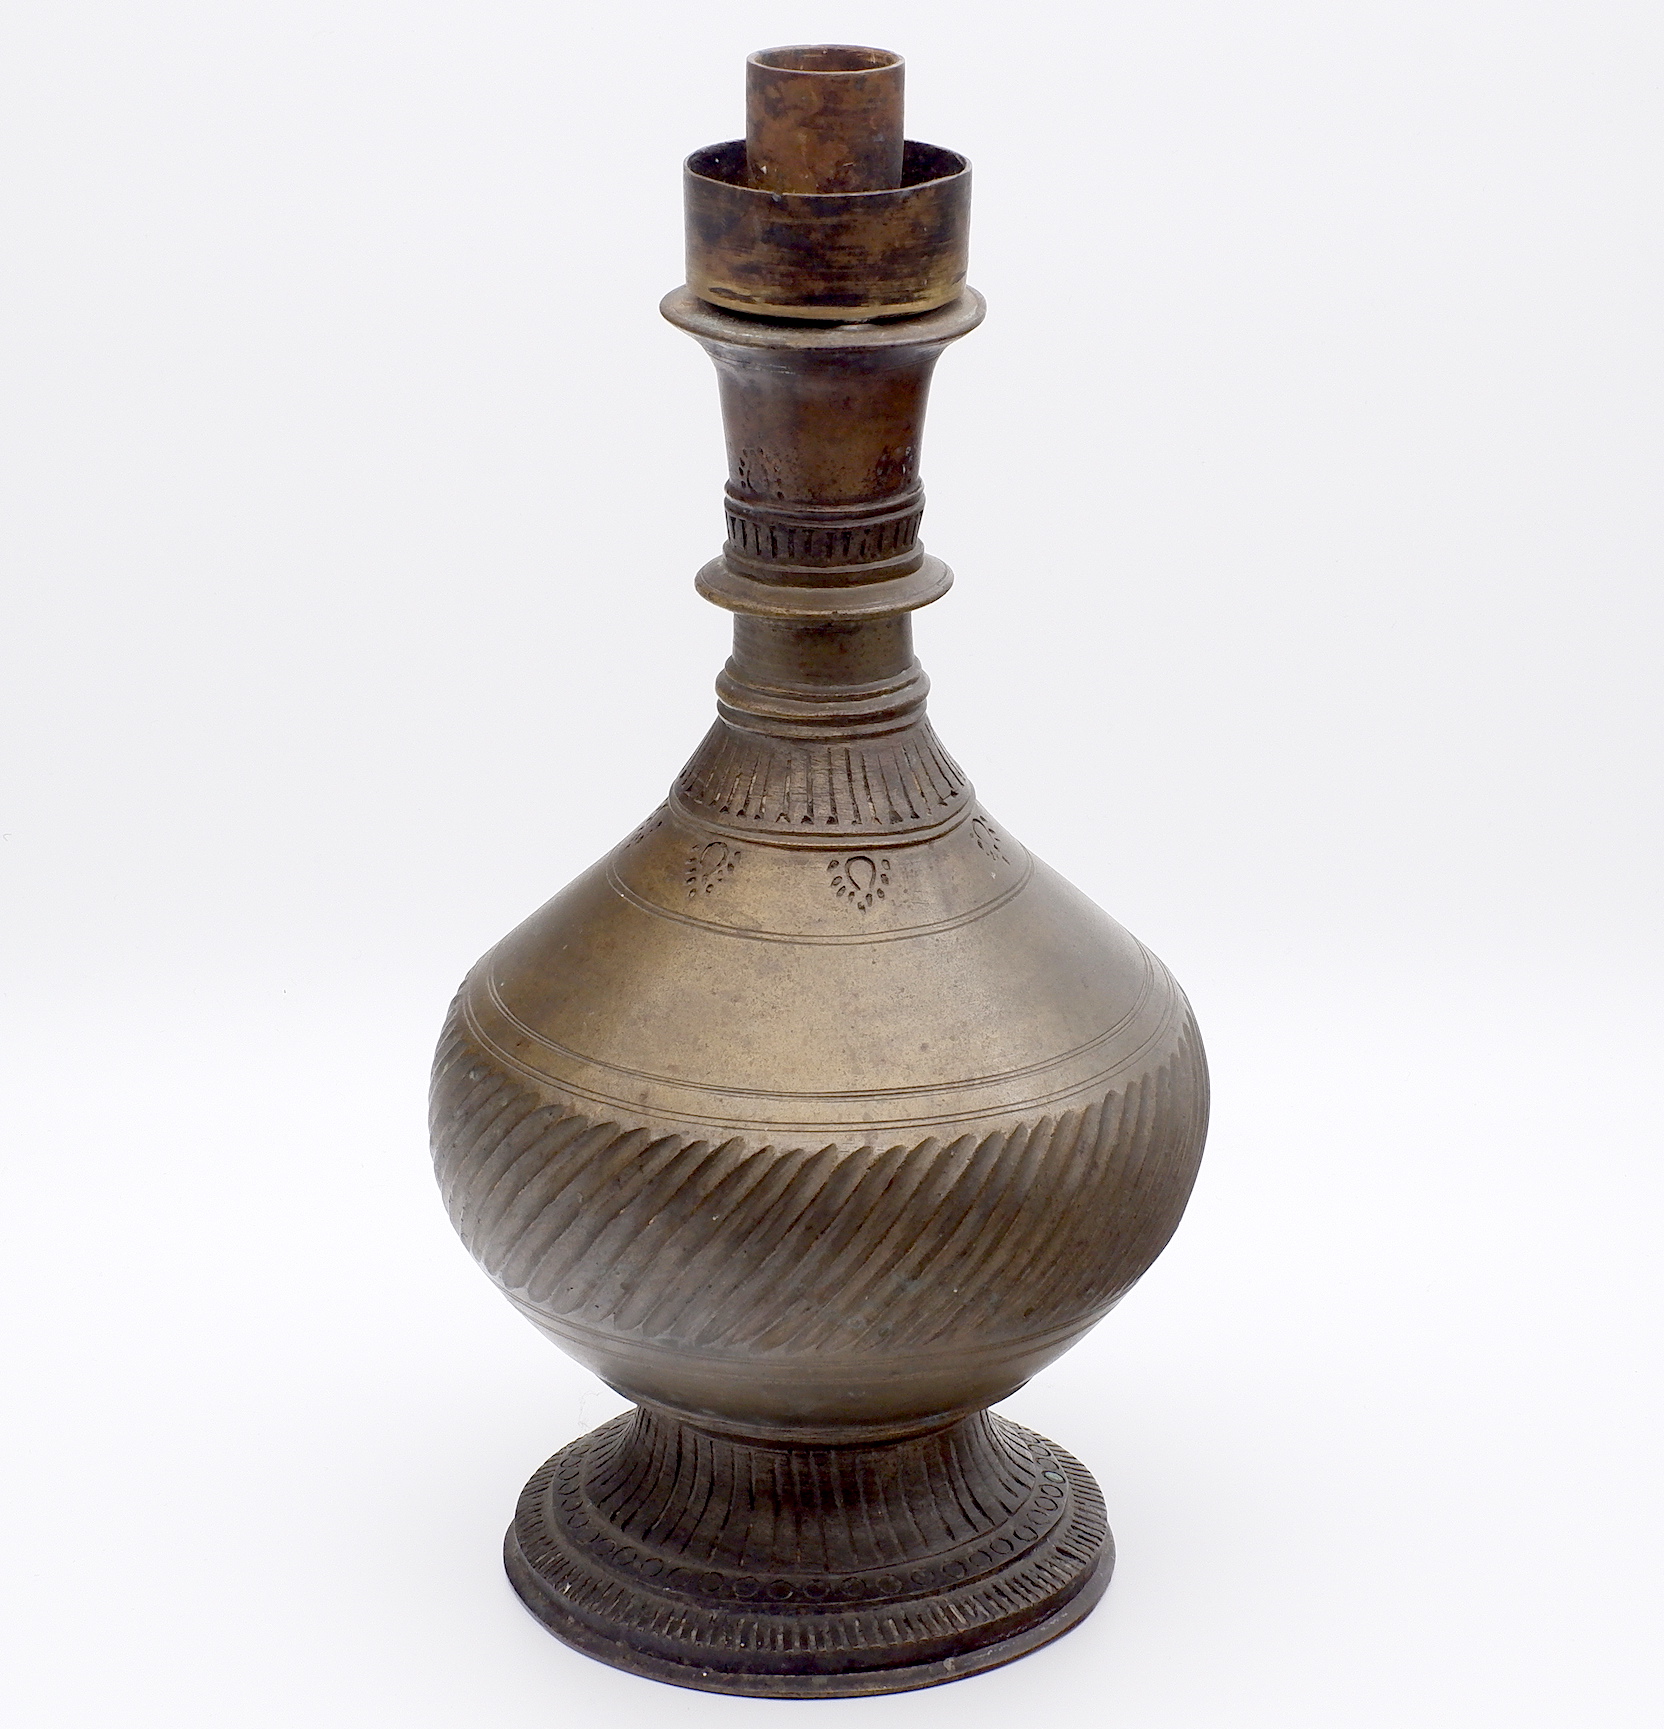 'Indian Huqqa Base or Lota Later Converted to a Candlestick'